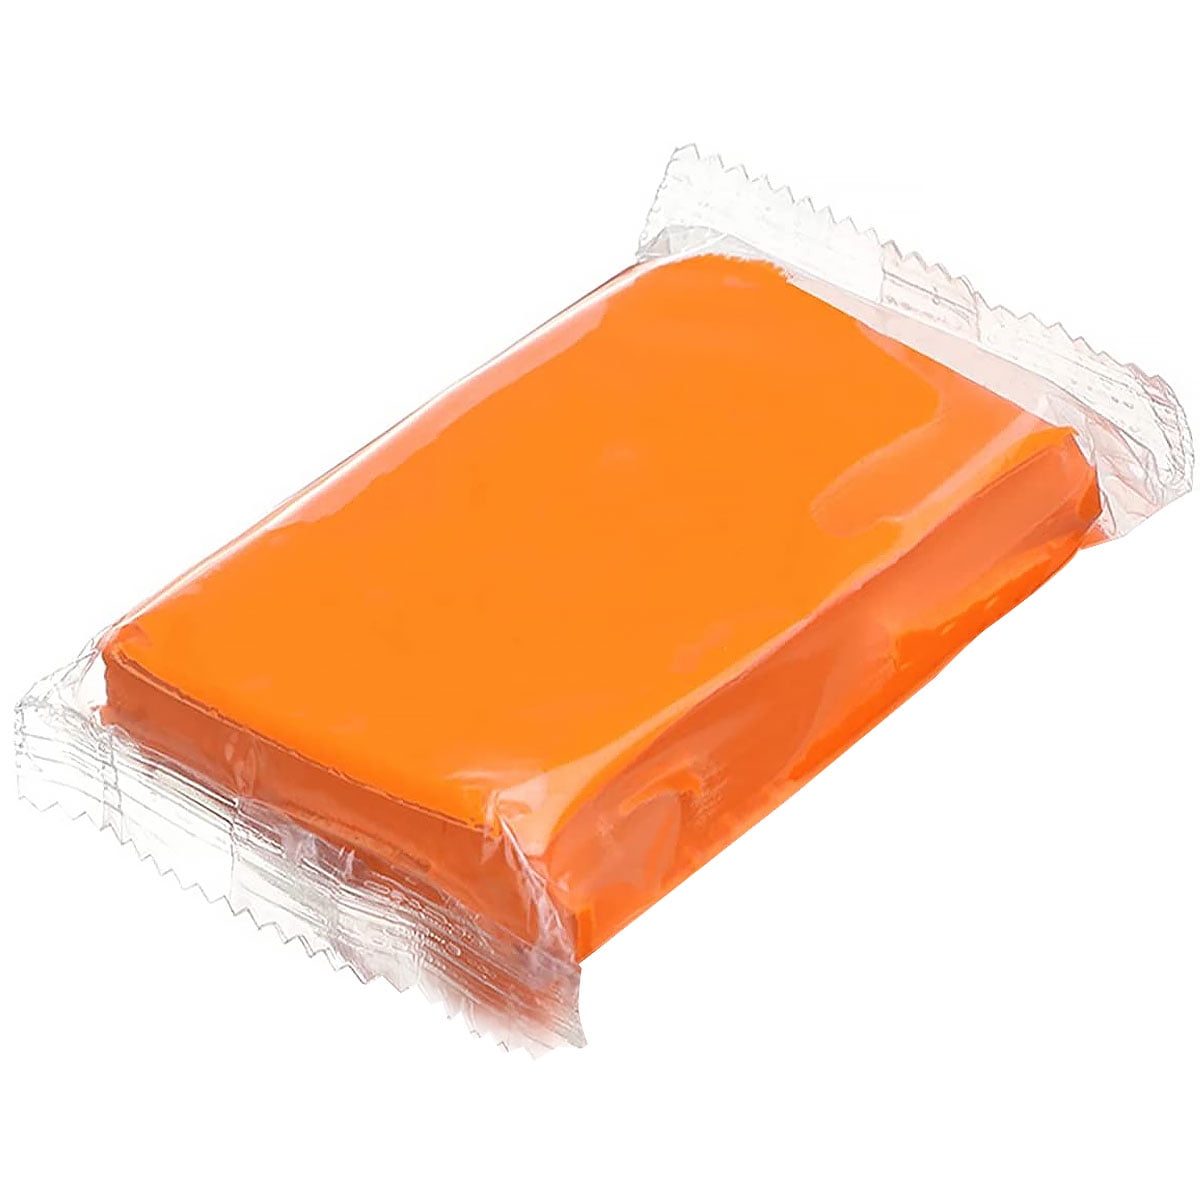  Car Clay Bars Auto Detailing 2 Pack 100g by TAKAVU